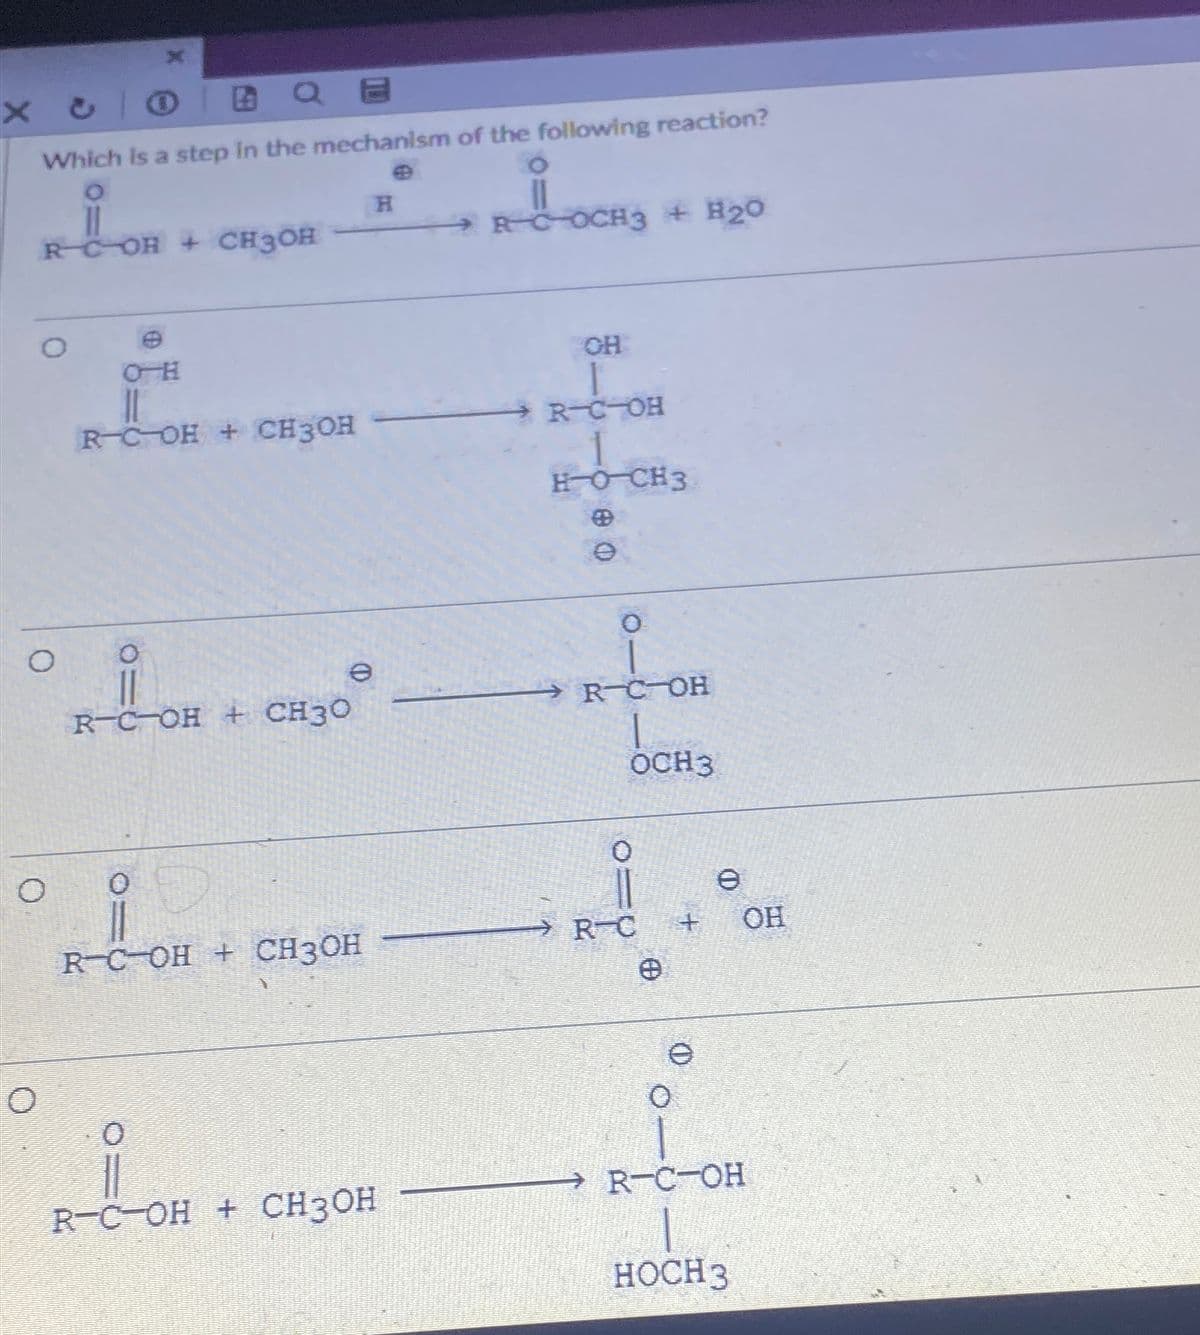 X
Xc
Which is a step in the mechanism of the following reaction?
RCOH + CH3OH
H
RCOCH3 + H2O
0
H-O
CH
R-COH + CH3OH
R-C-OH
HOCH3
0
R-C-OH + CH3O
e
0
B
@ O
Ө
0
R-C-OH
OCH3
e
RC OH + CH3OH
RC
+
OH
Θ
e
O
R-C-OH + CH3OH
→ R-C-OH
HOCH 3